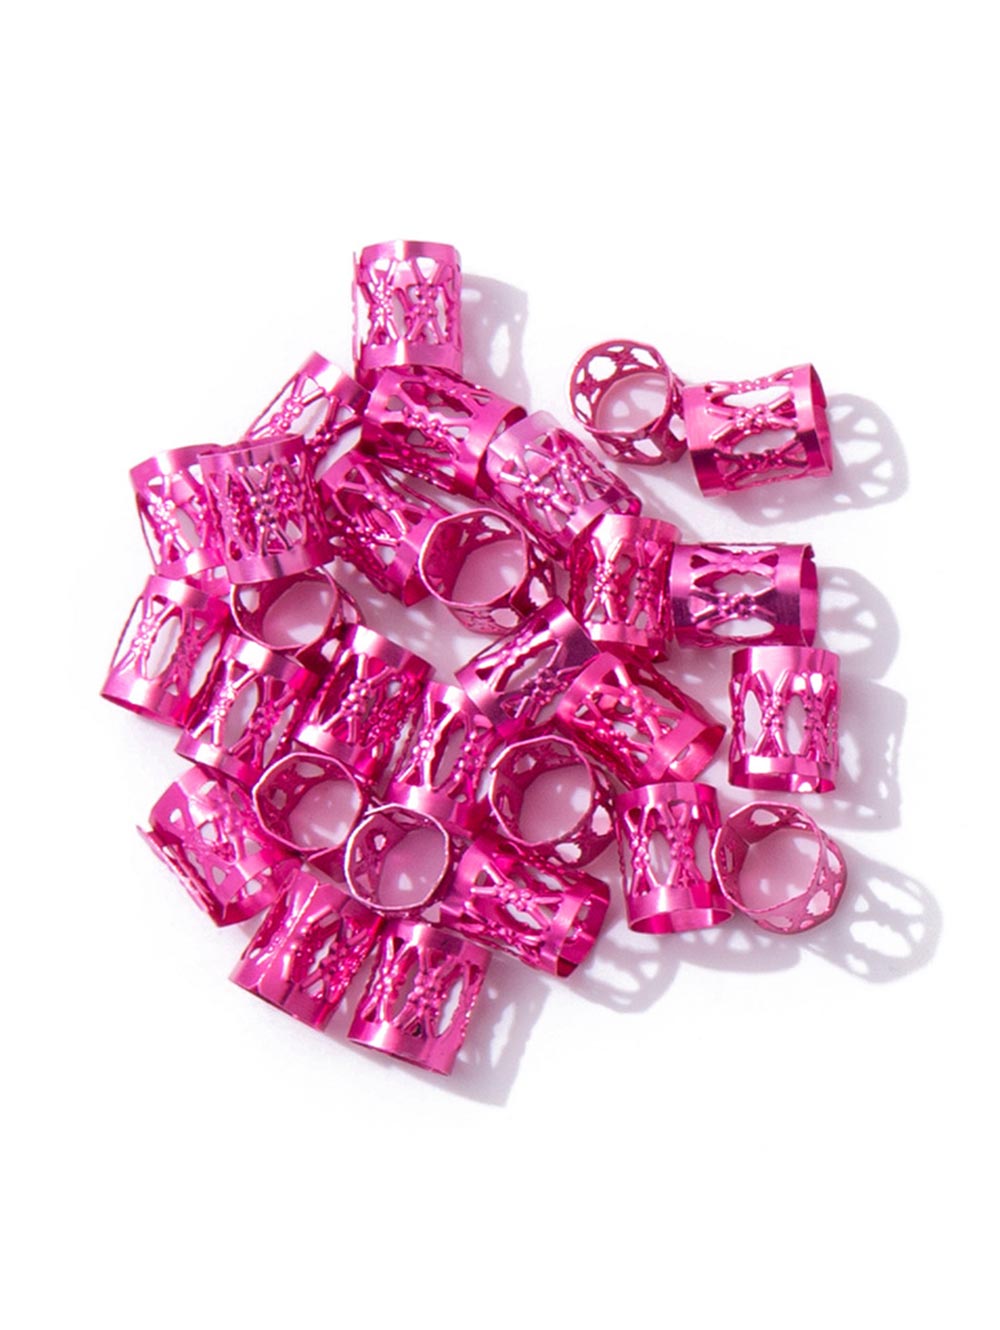 50pcs metal cuffs colorful cuff beads for hair extensions